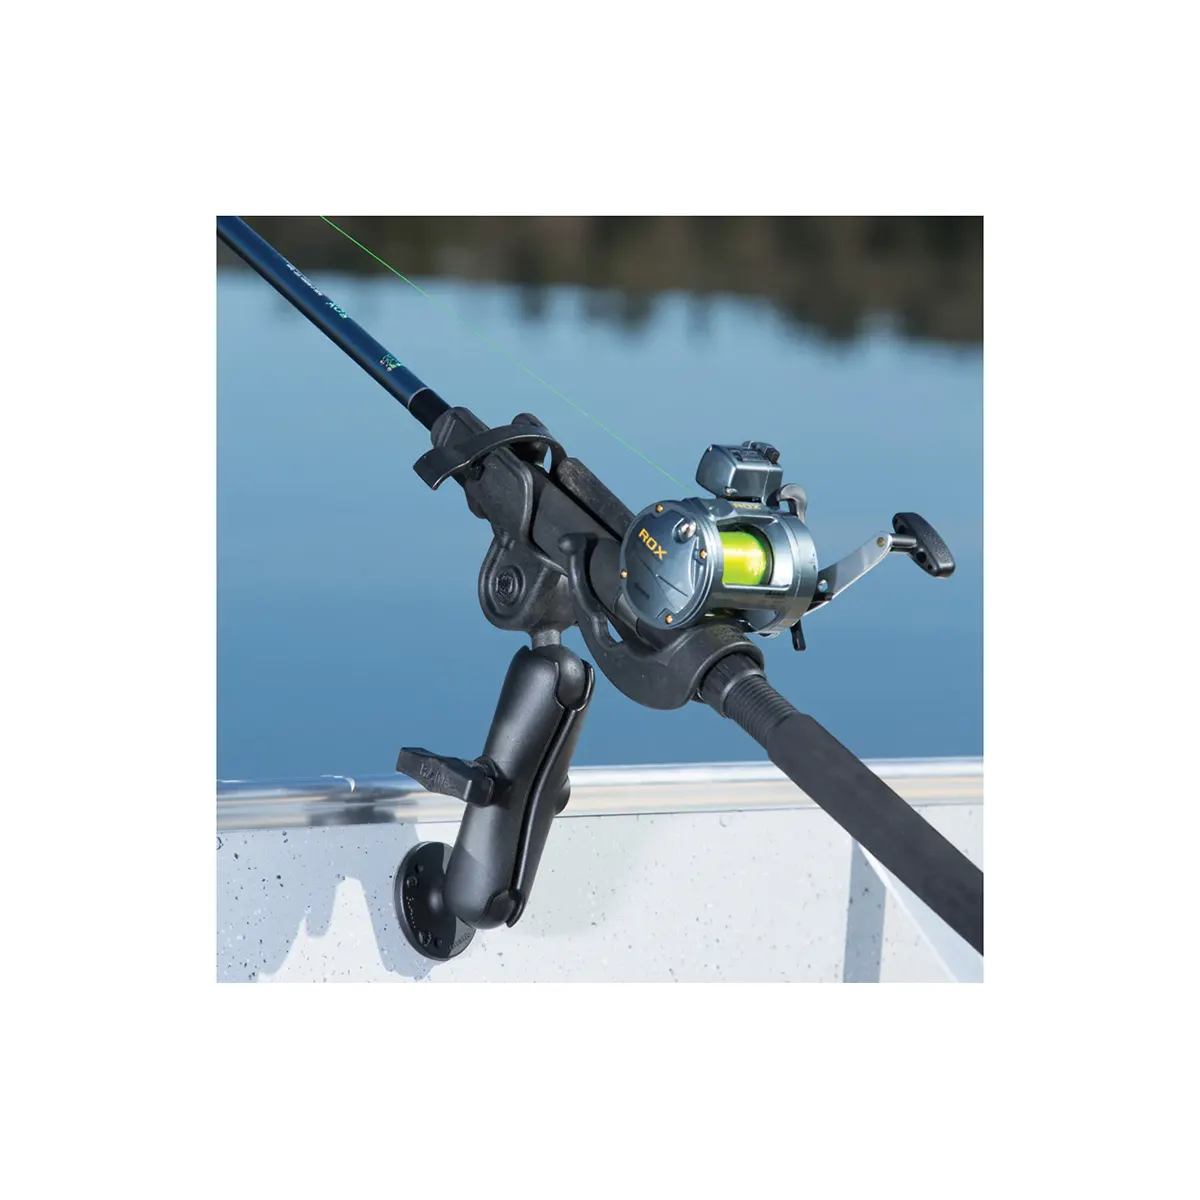 RAM ROD Fishing Rod Holder with 2 x 2.5 Base, Wilderness Systems Kayaks